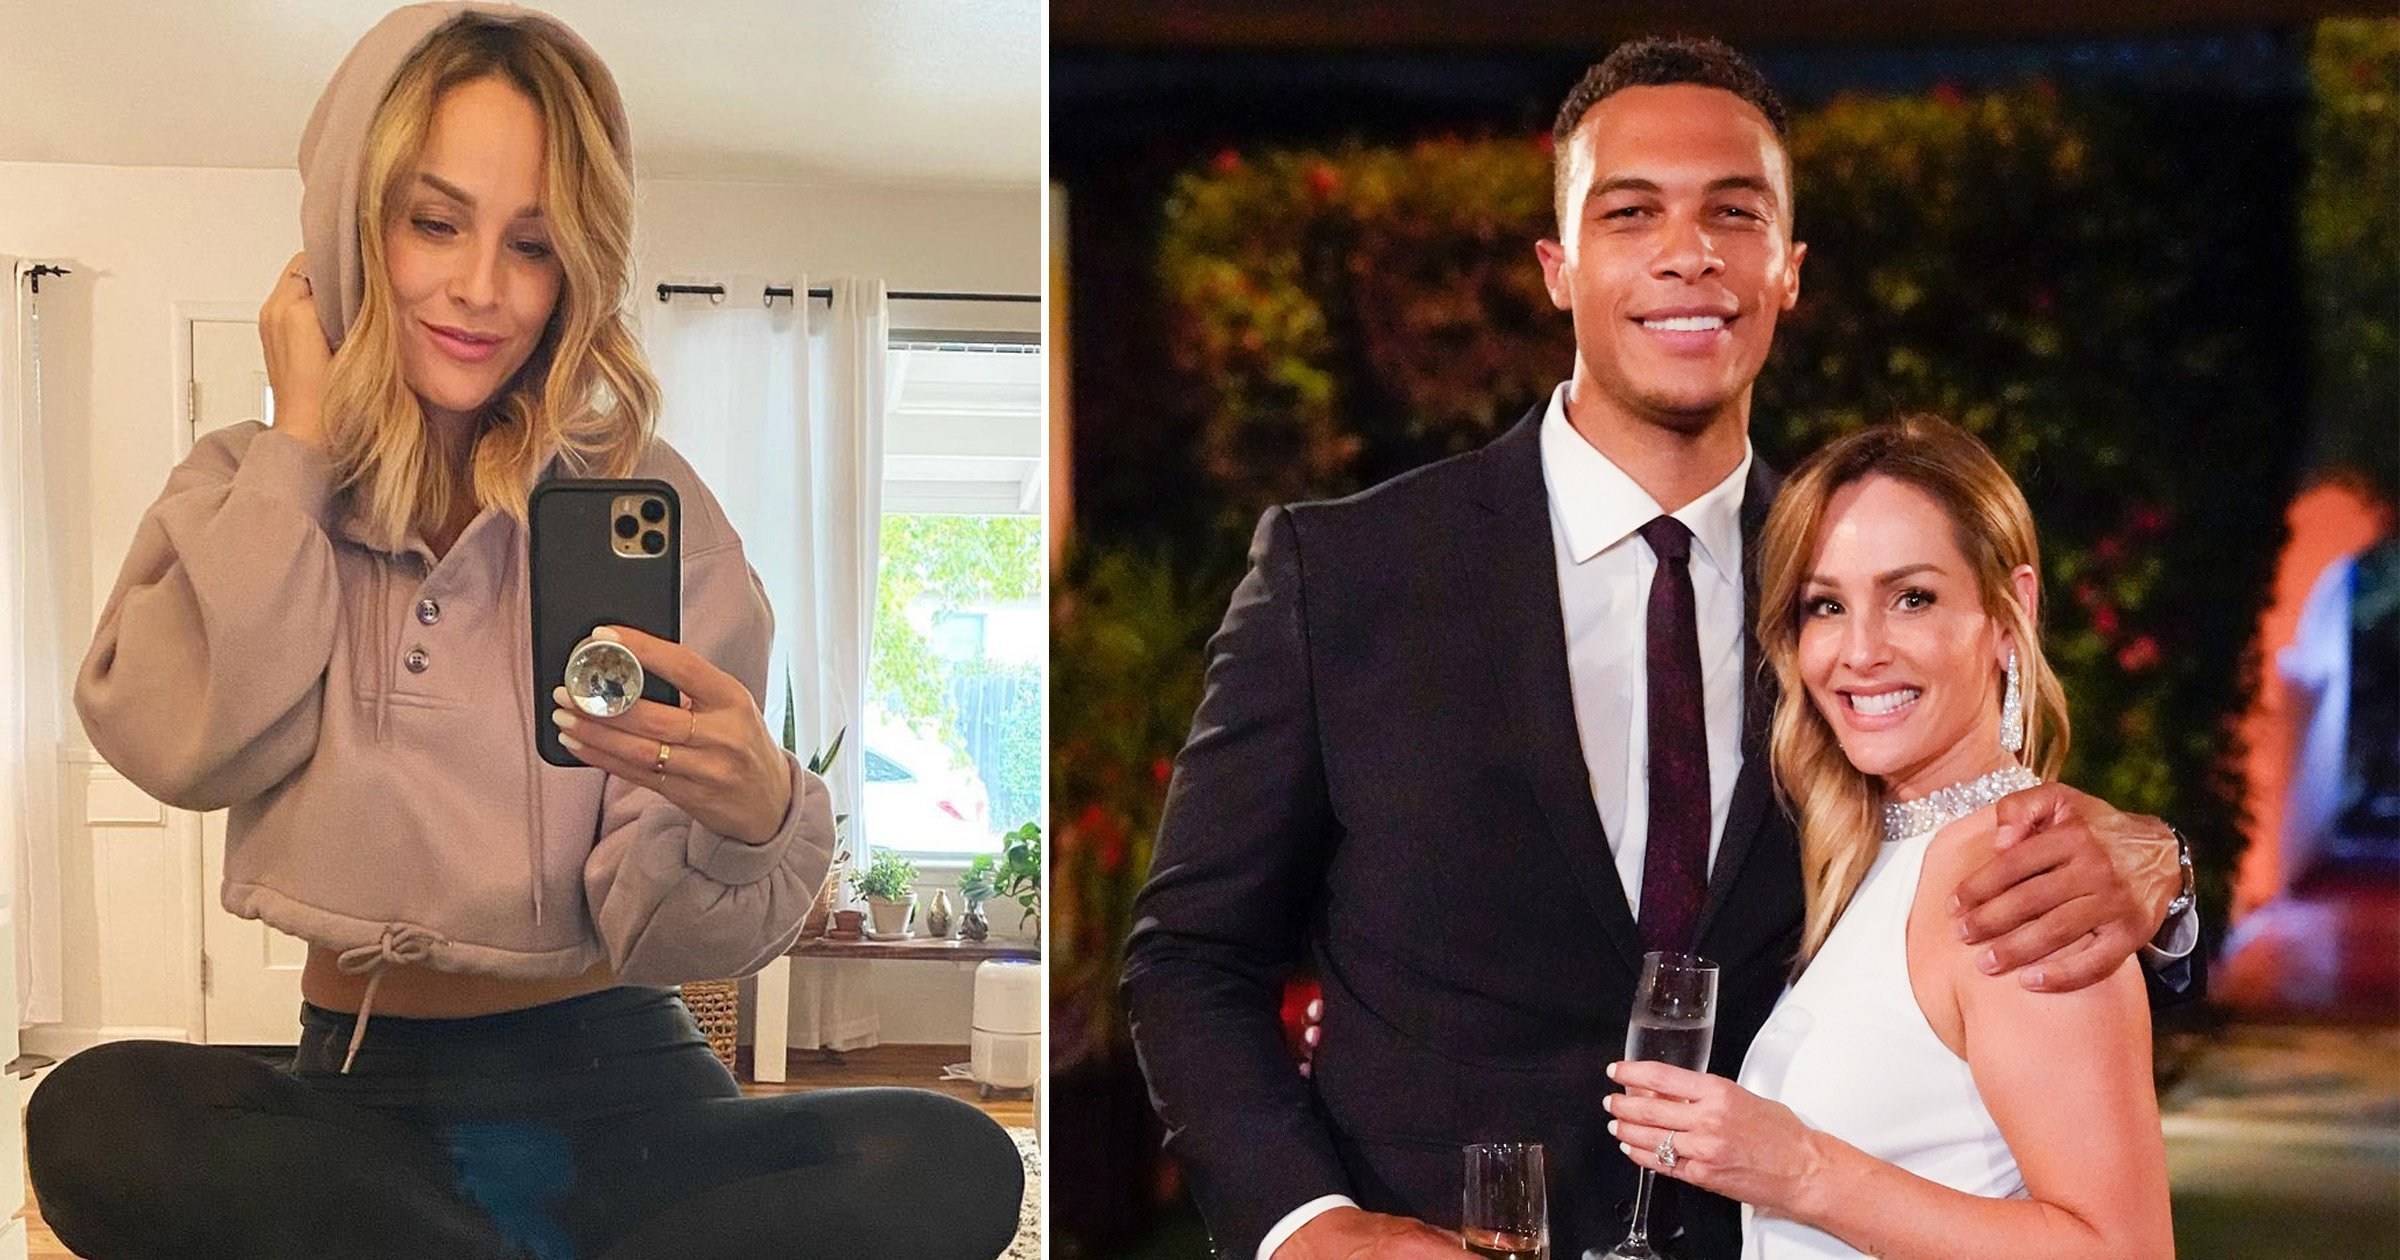 The Bachelorette’s Clare Crawley ‘crushed’ after Dale Moss announced split: ‘This is not what I expected’